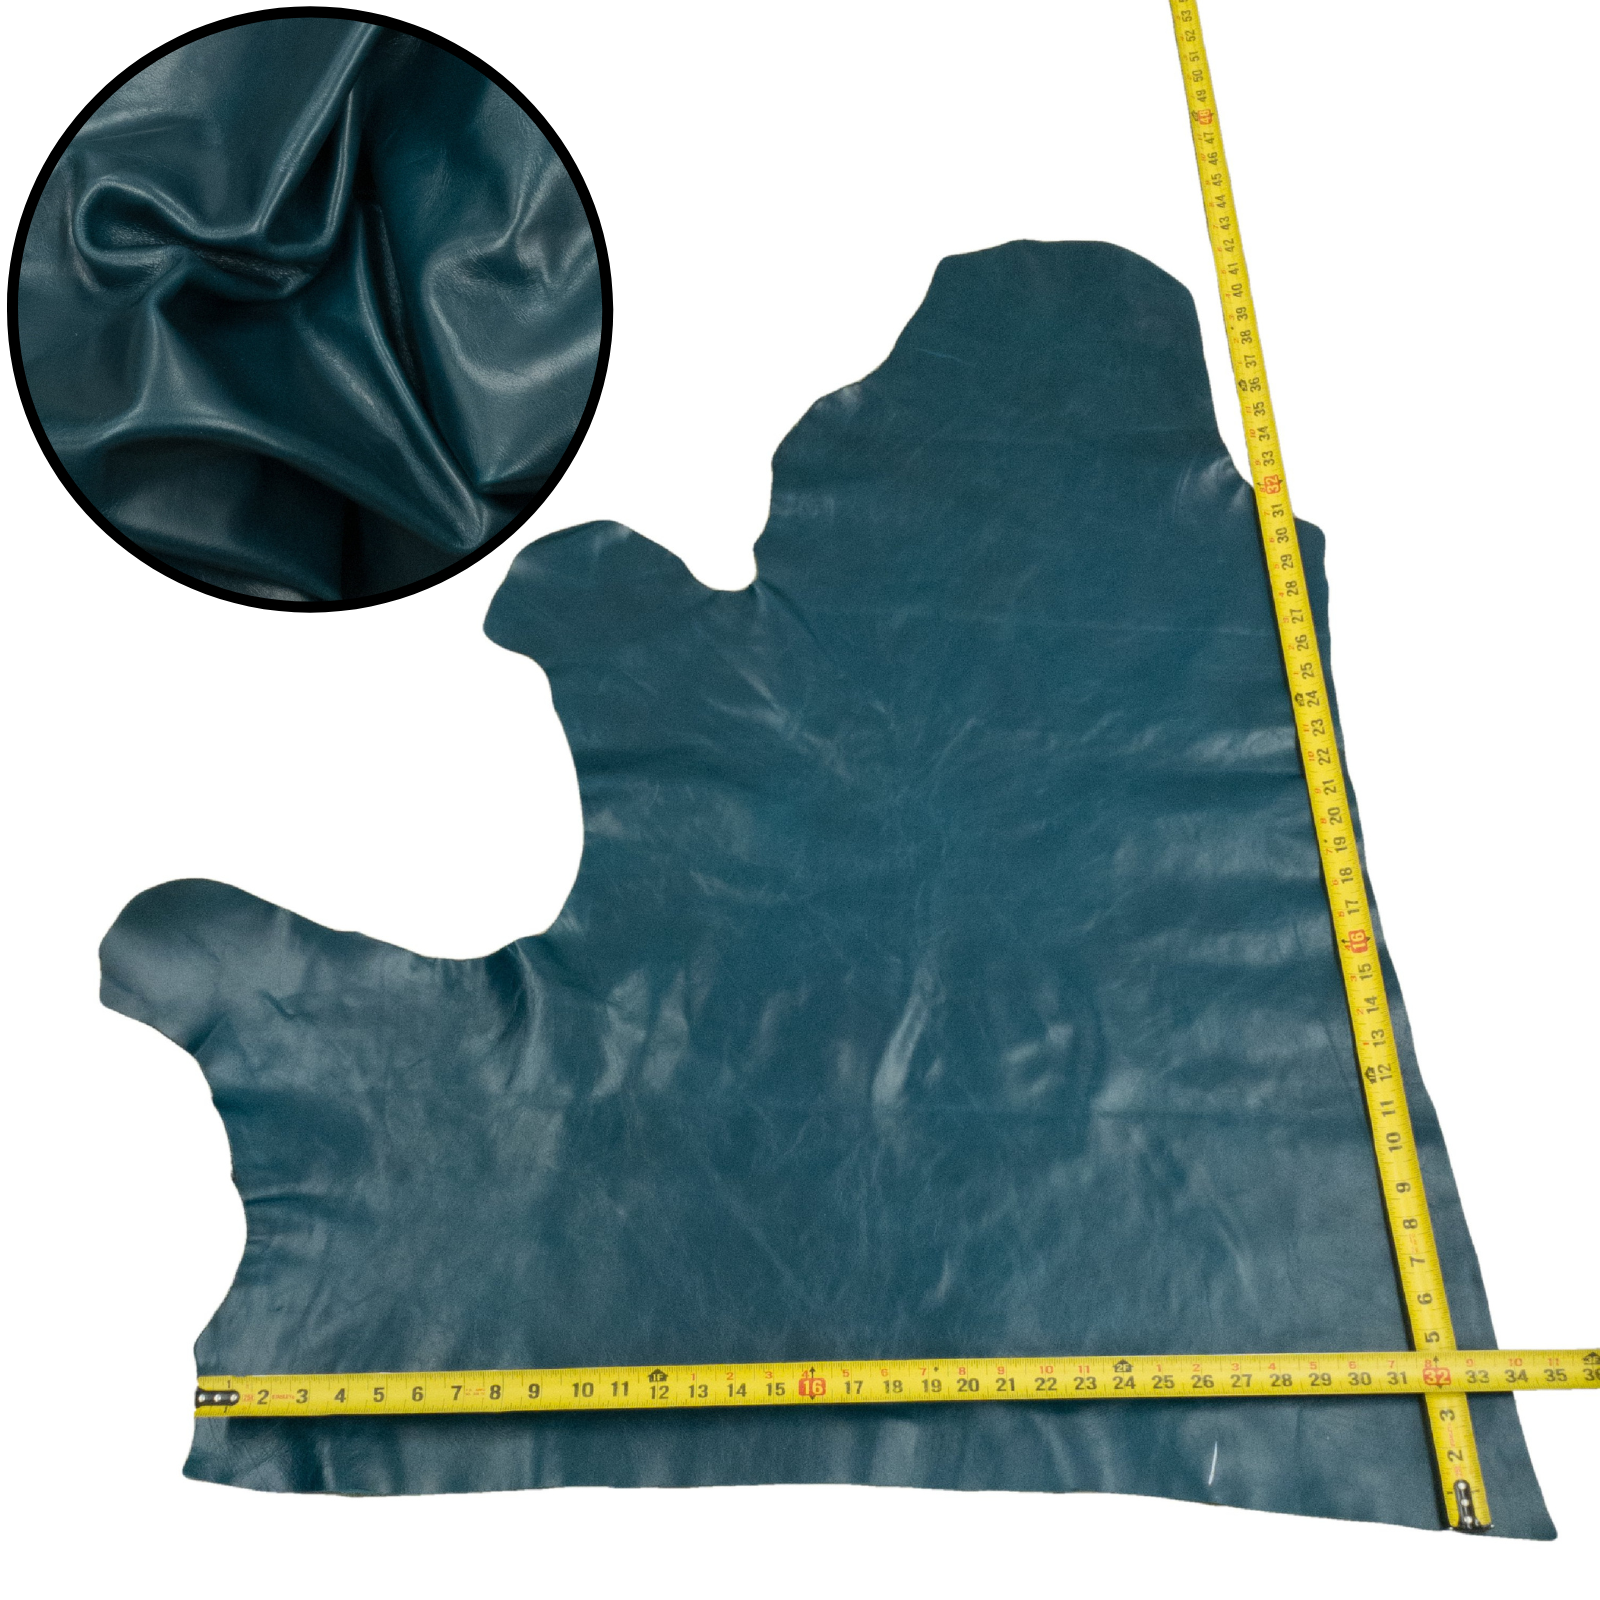 Blues, 3-8 Sq Ft Upholstery Cowhide Project Pieces, Peacock Blue (2-3 oz) / 6 / 1 | The Leather Guy